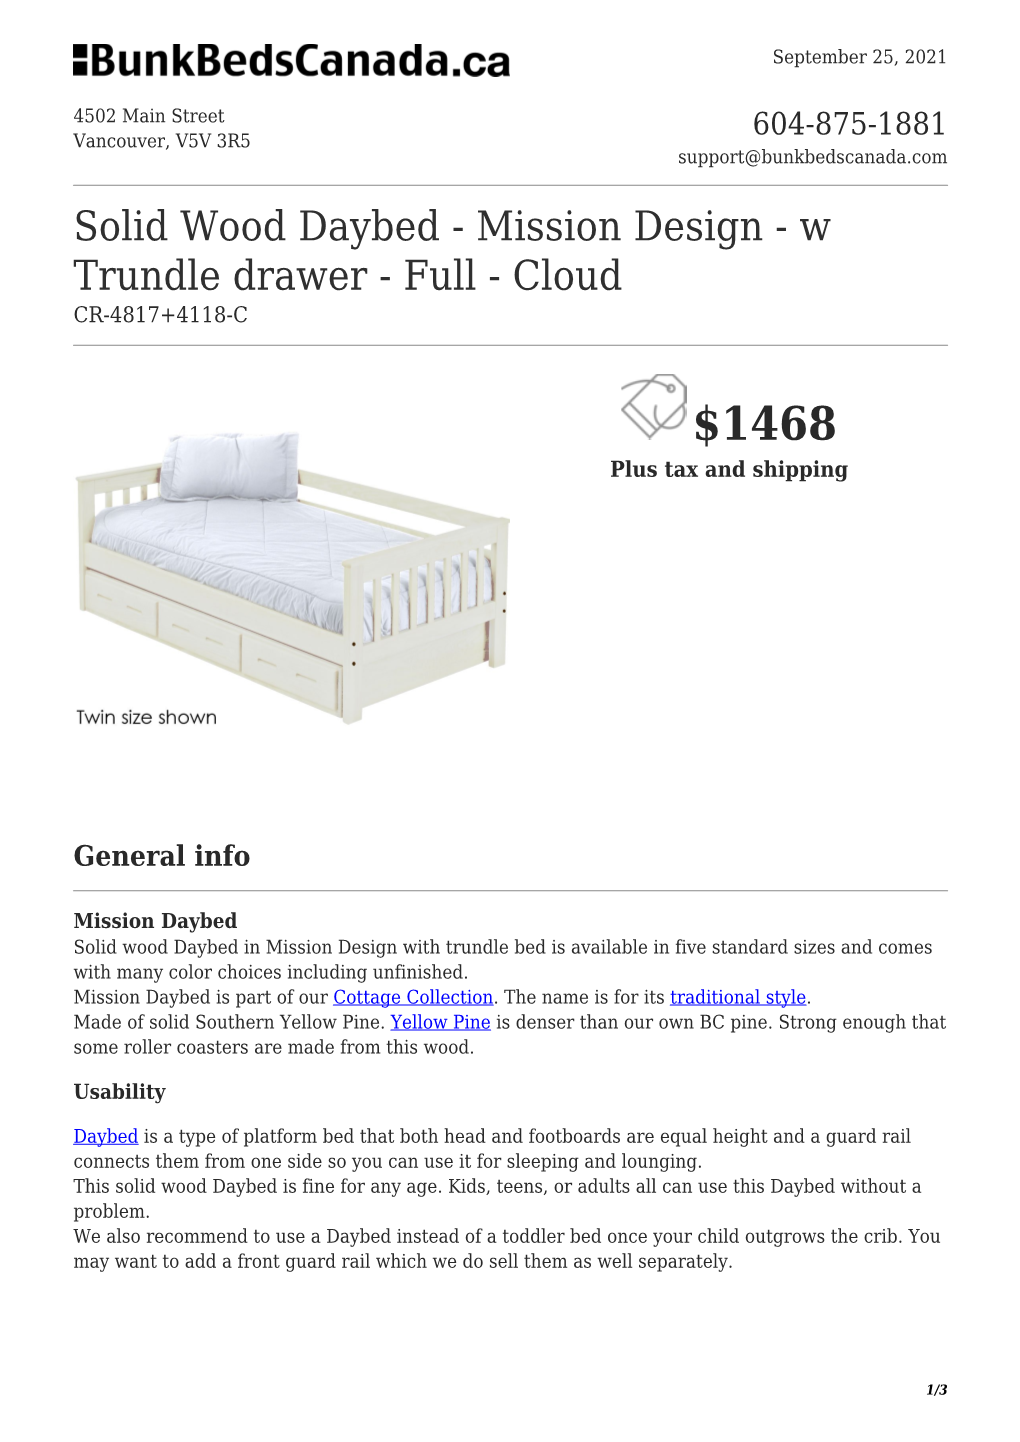 Solid Wood Daybed - Mission Design - W Trundle Drawer - Full - Cloud CR-4817+4118-C